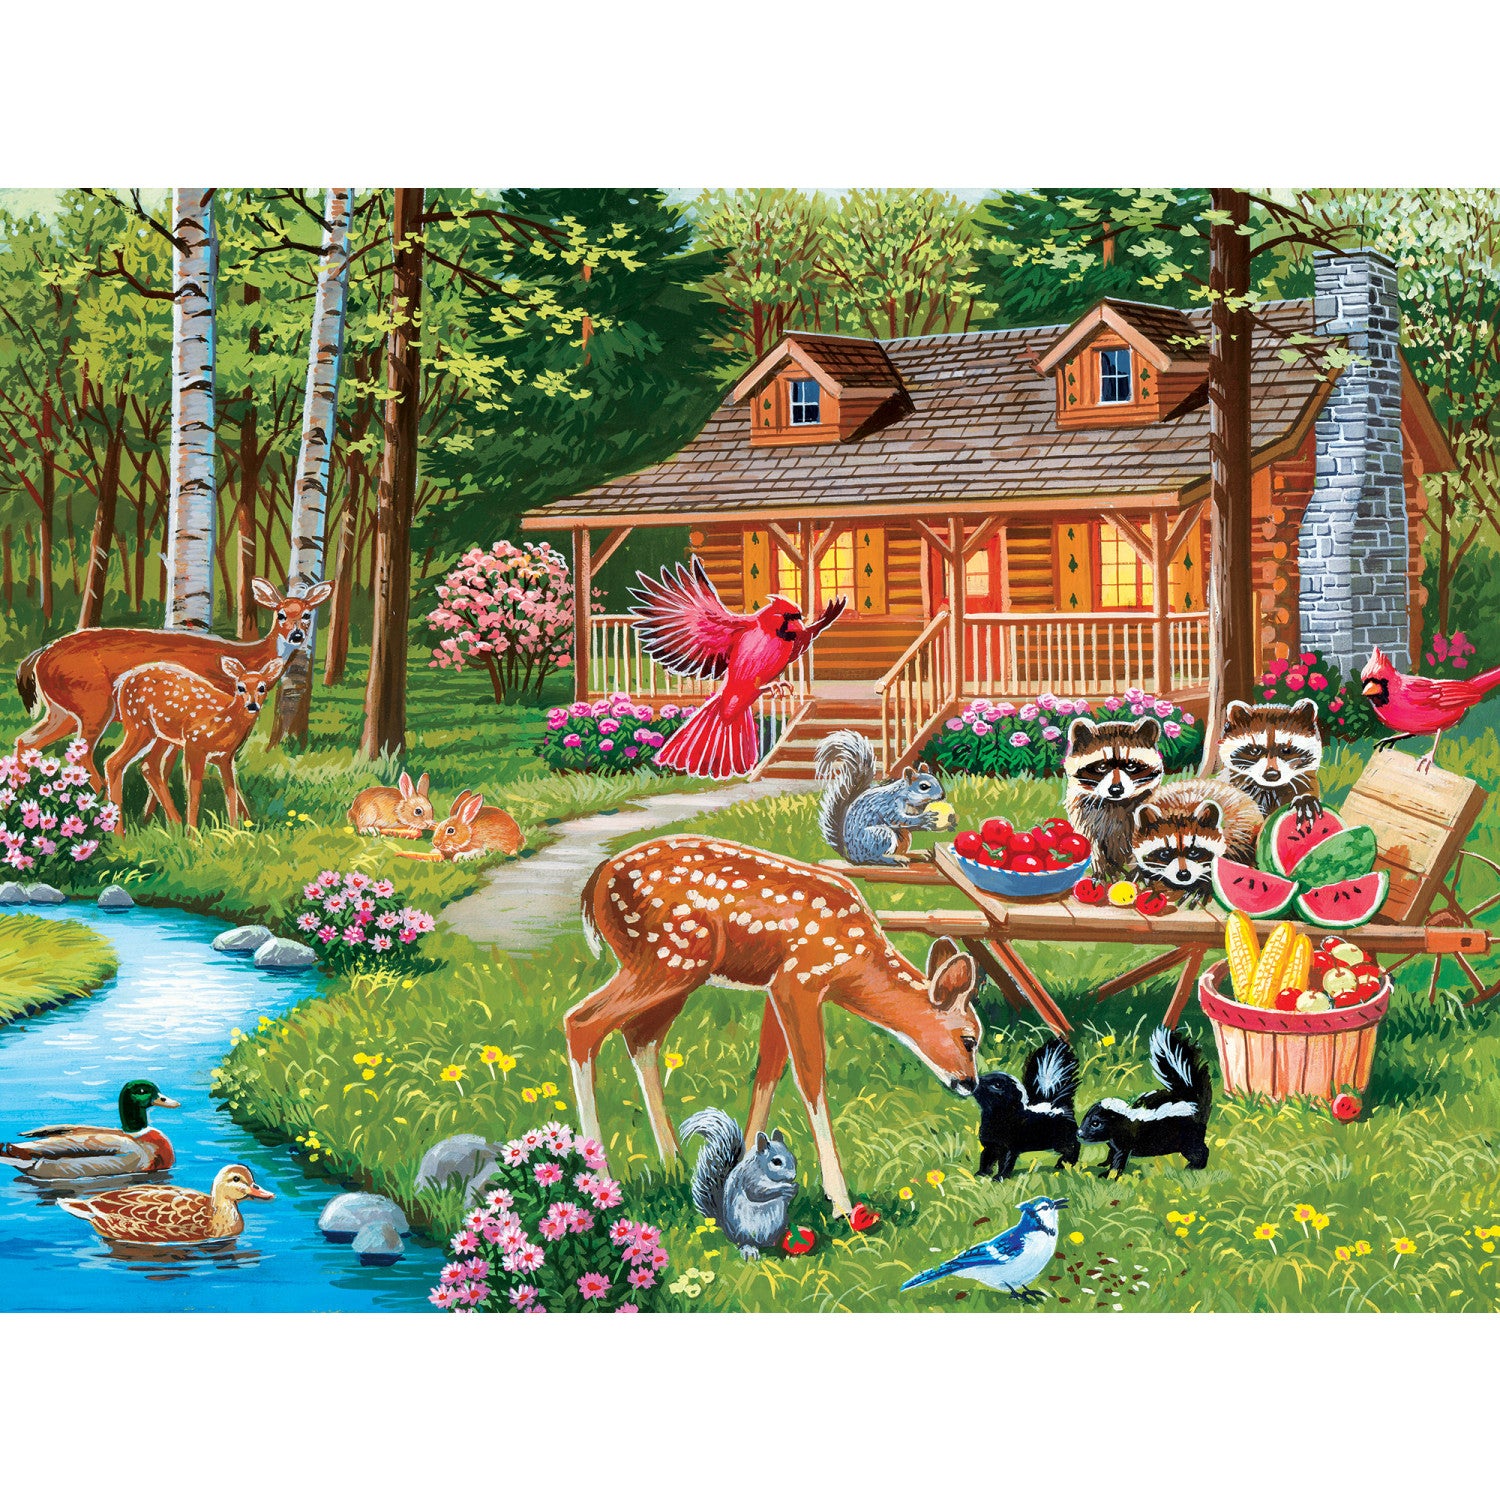 Family Time - Creekside Gathering 400 Piece Puzzle